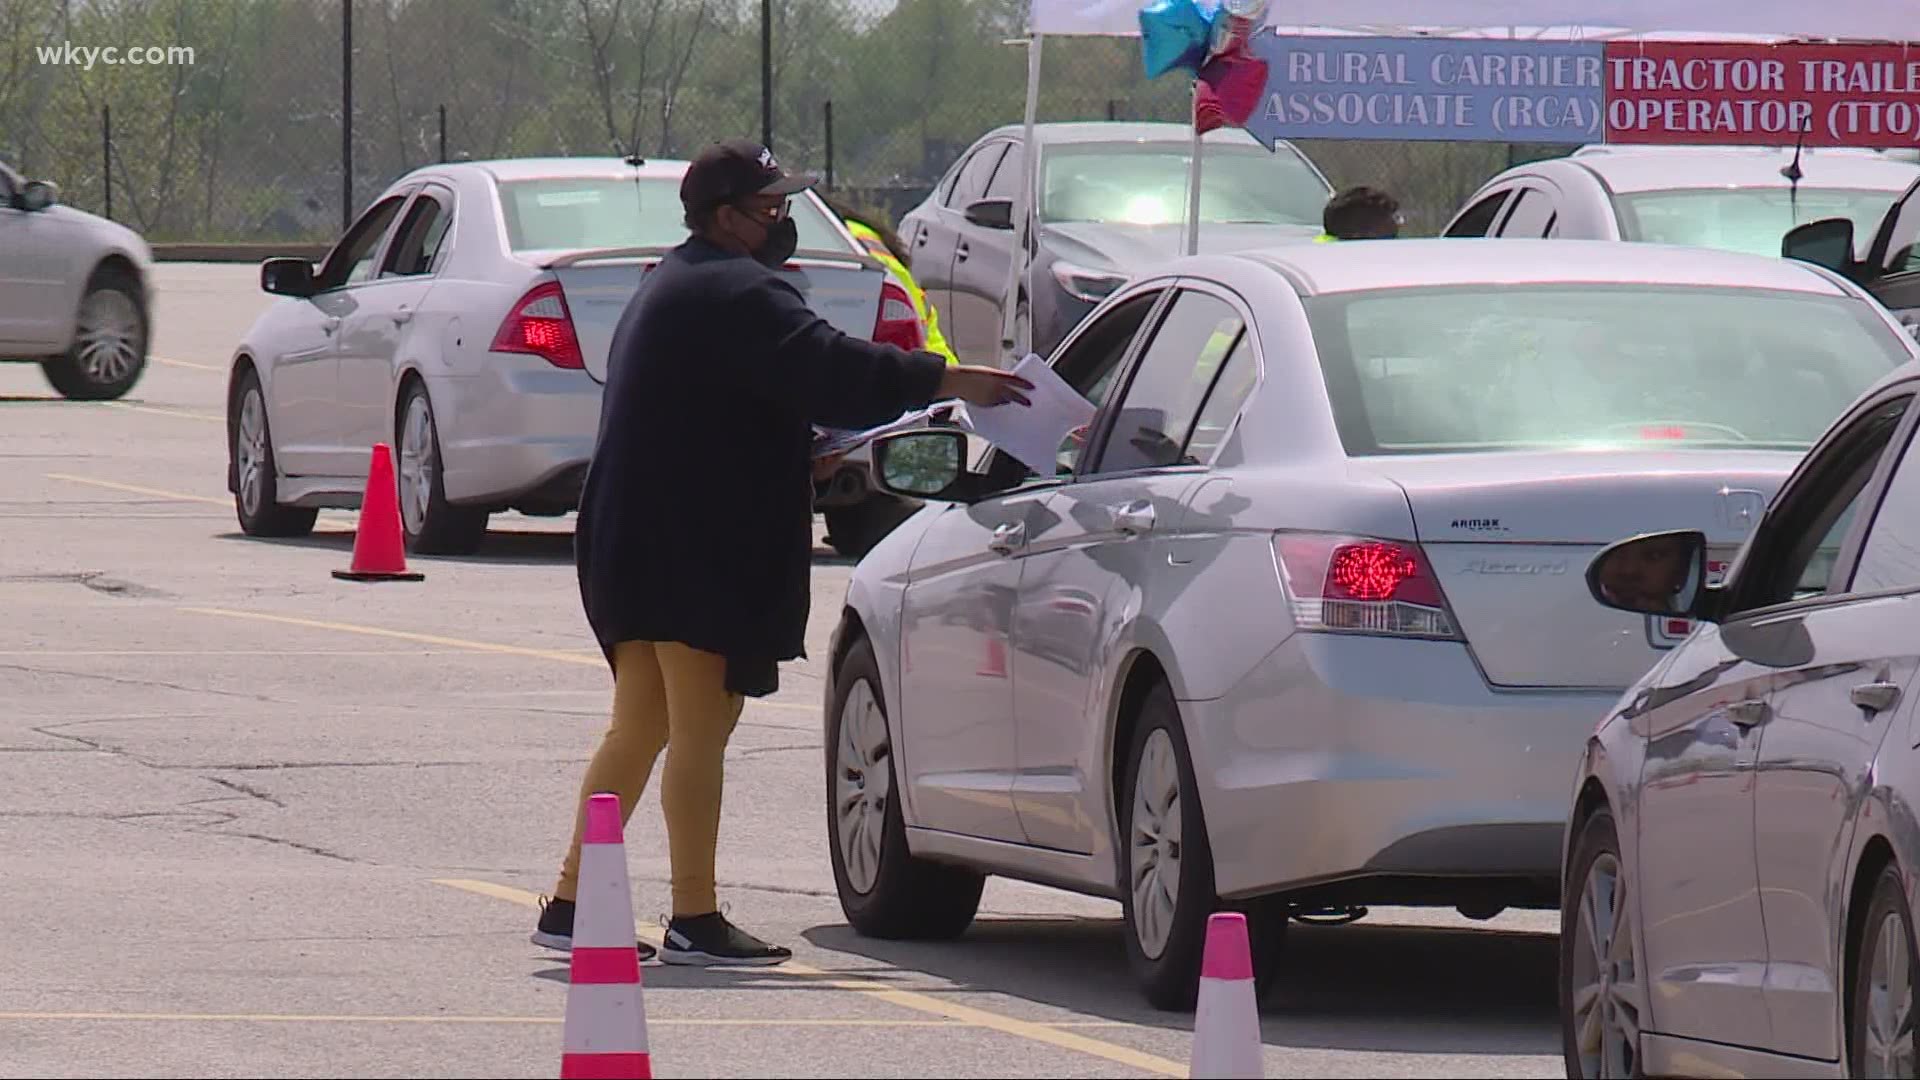 The USPS held a drive-through hiring event in Northeast Ohio today. They were looking to fill 200 jobs in the area.